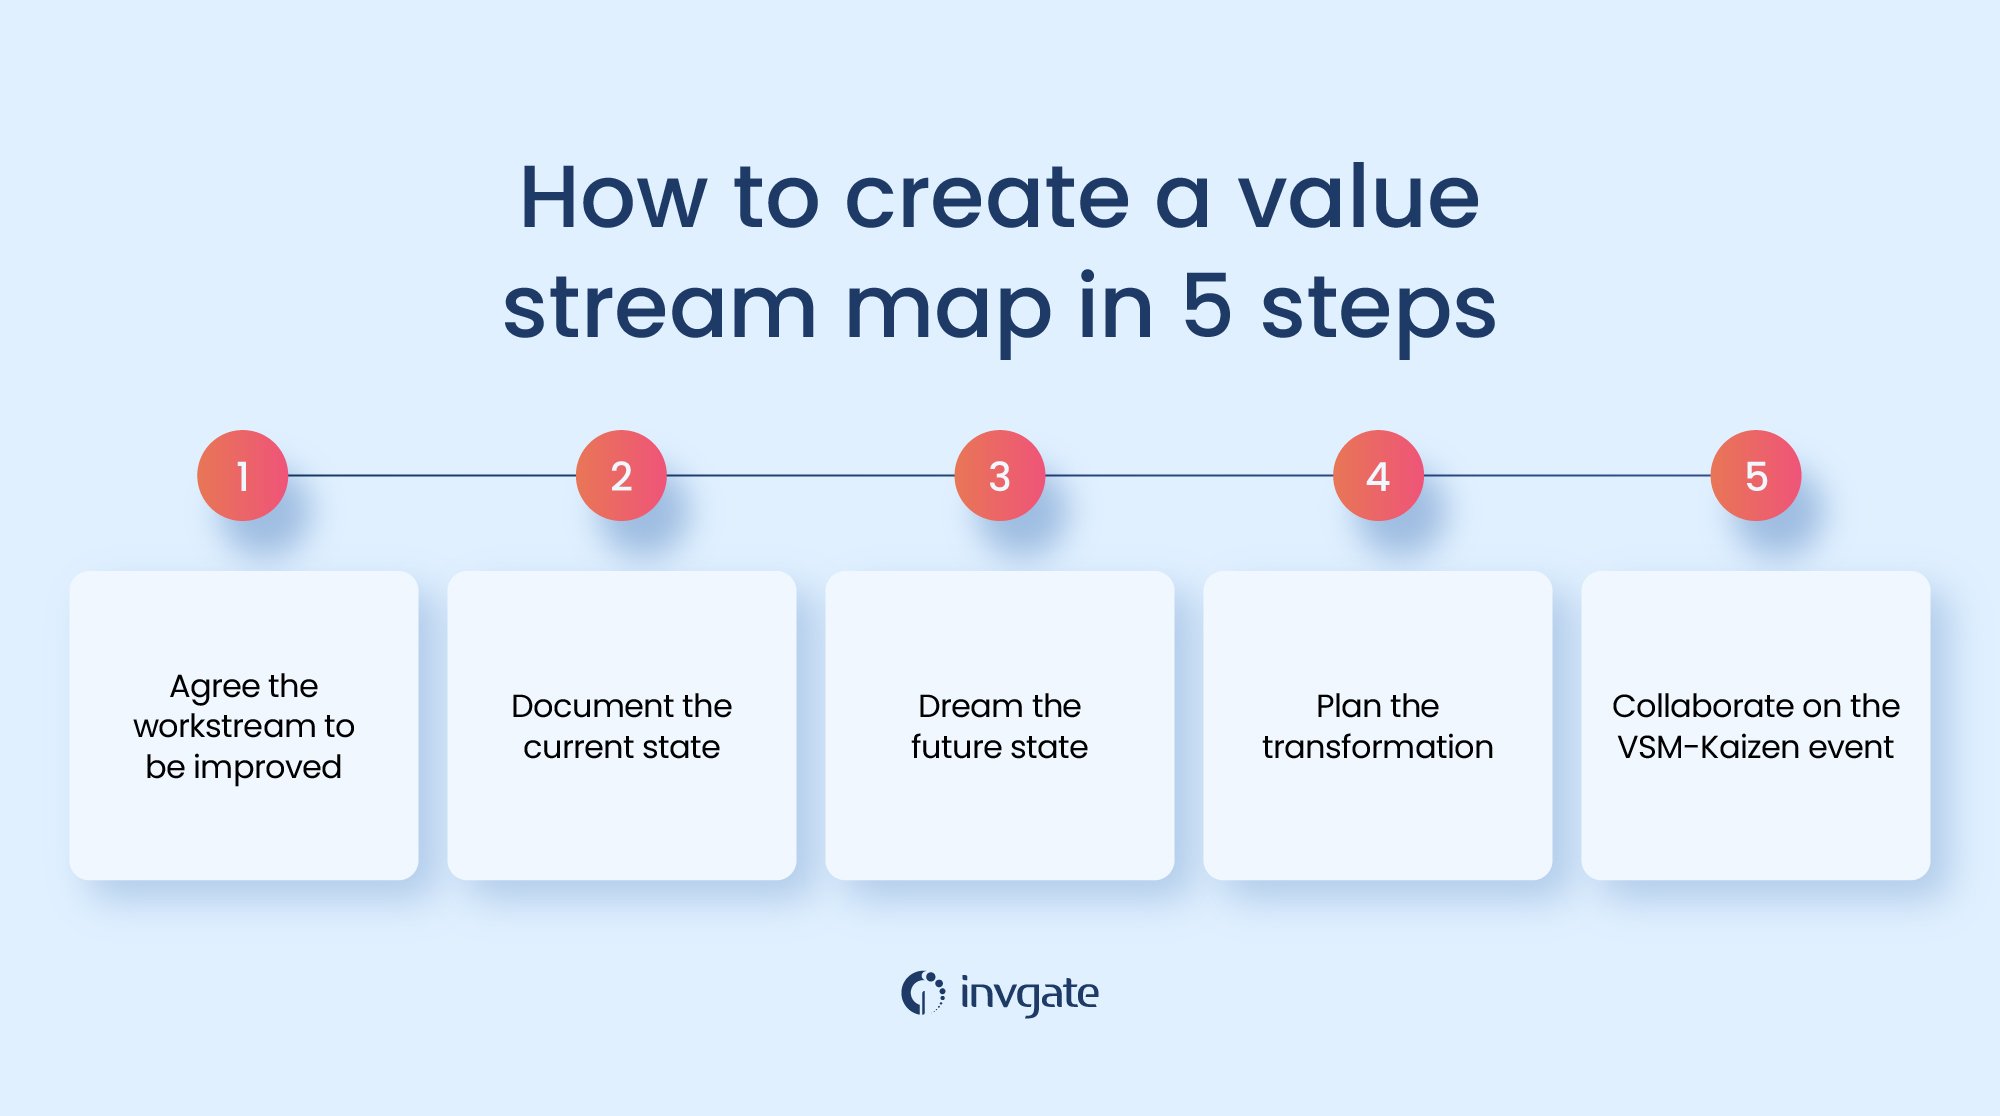 Value Stream Mapping is a Kaizen event. Based on this framework, these are the five basic steps to create a value stream map, with a focus on problem and improvement management.